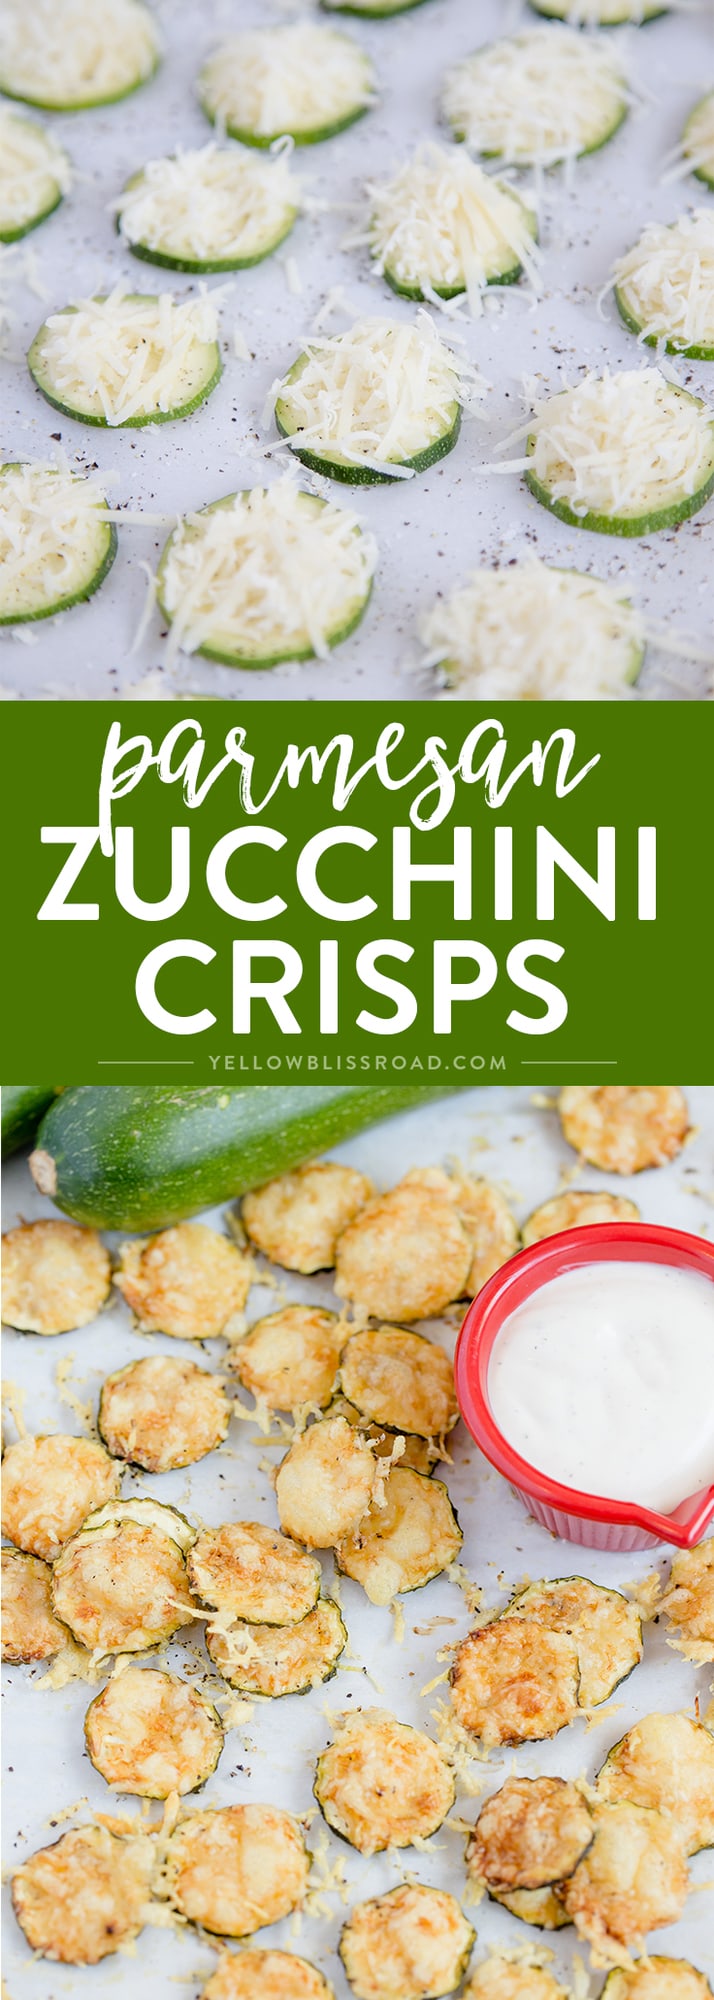 Zucchini Chips collage of images with text for pinterest